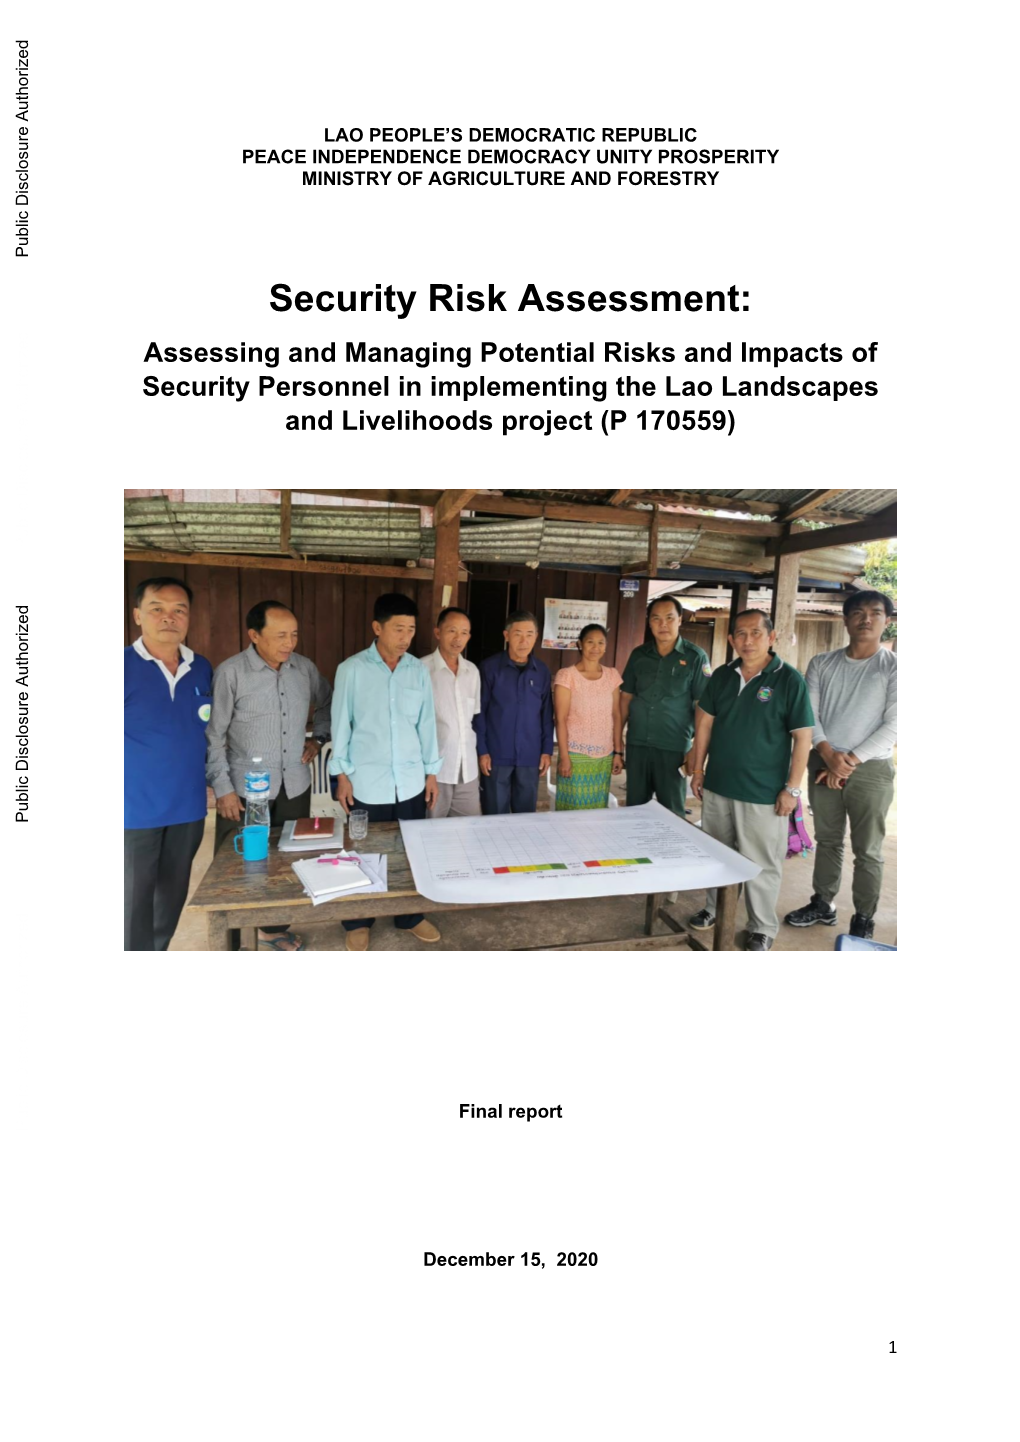 Assessing and Managing Potential Risks and Impacts of Security Personnel in Implementing the Lao Landscapes and Livelihoods Project (P 170559)